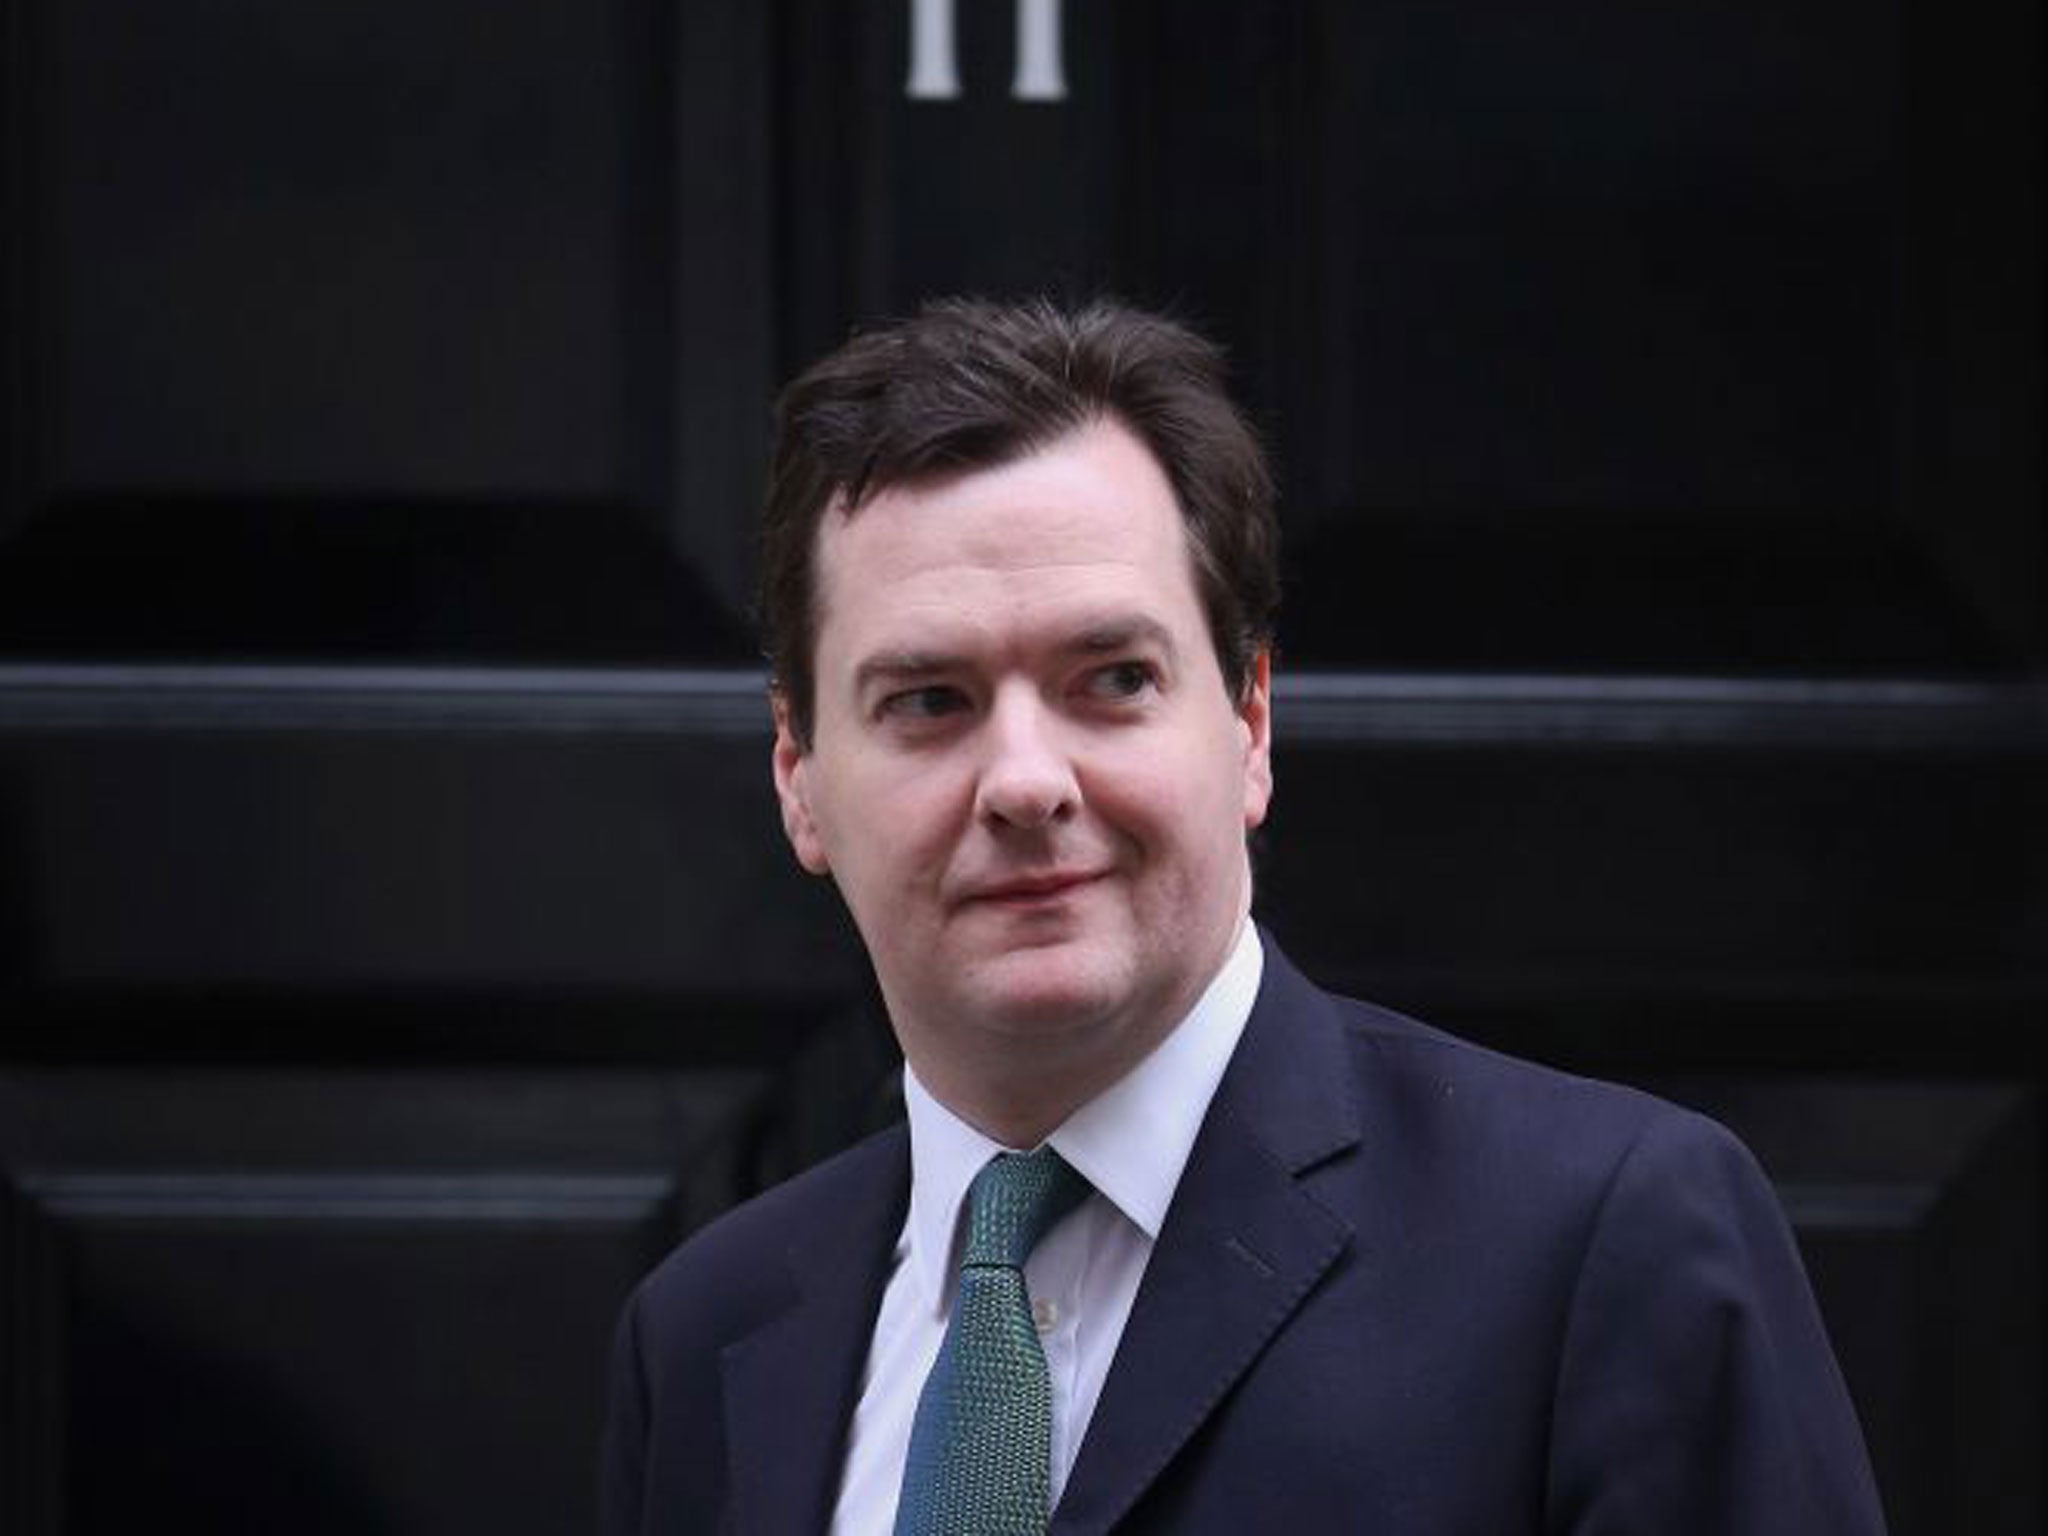 The Chancellor says the move could save the Treasury up to £2.5bn a year